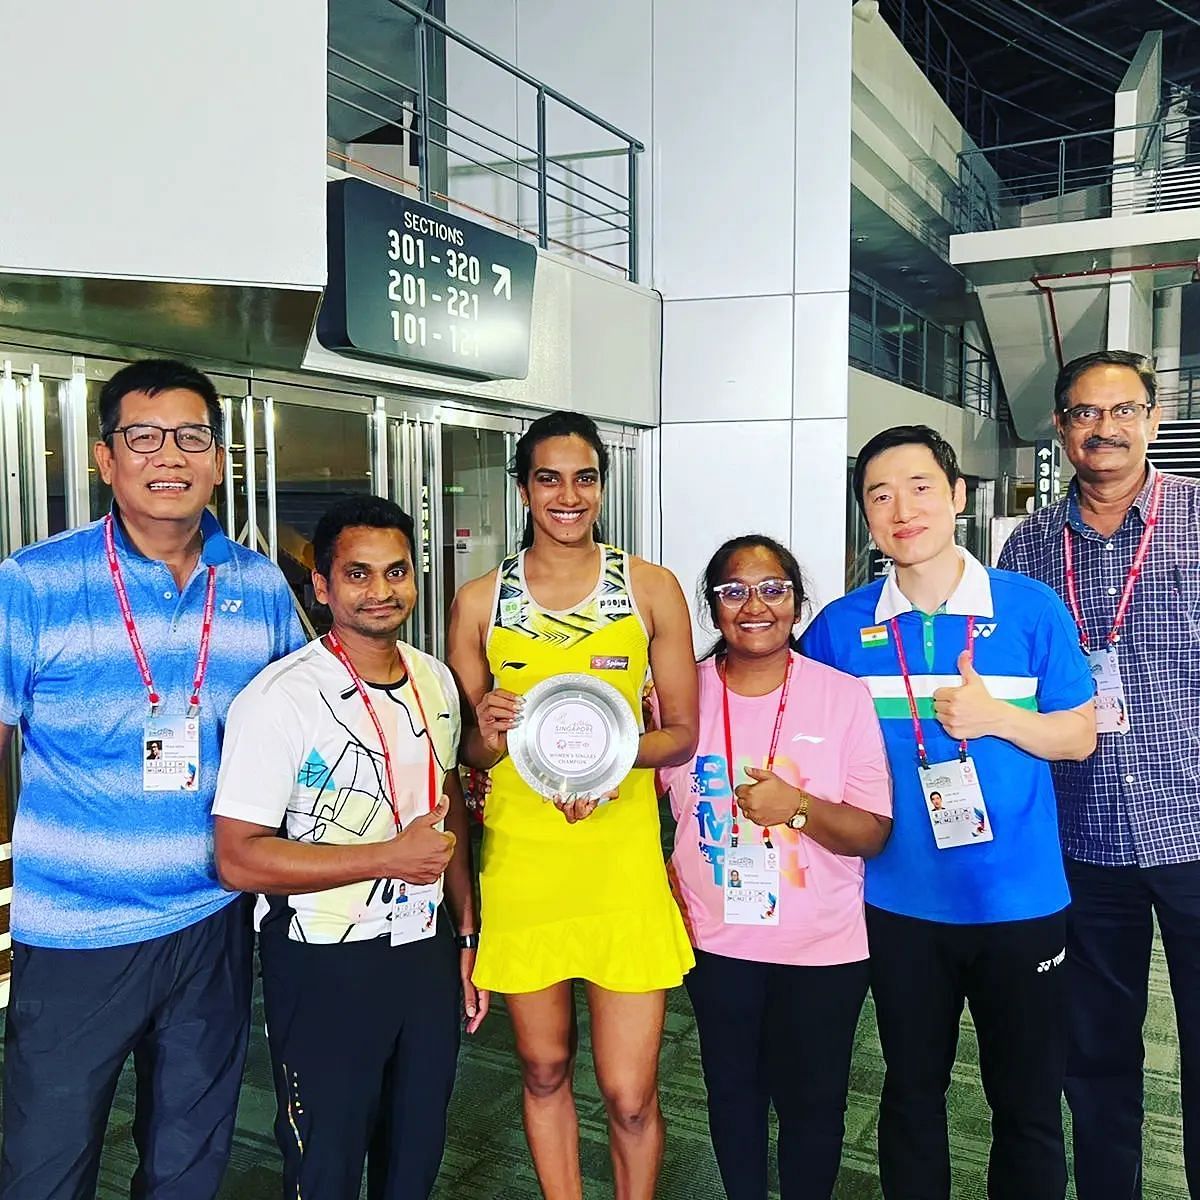 PV Sindhu with her support staff after the Singapore Open final on Sunday. (Pic credit: Evangeline Baddam)